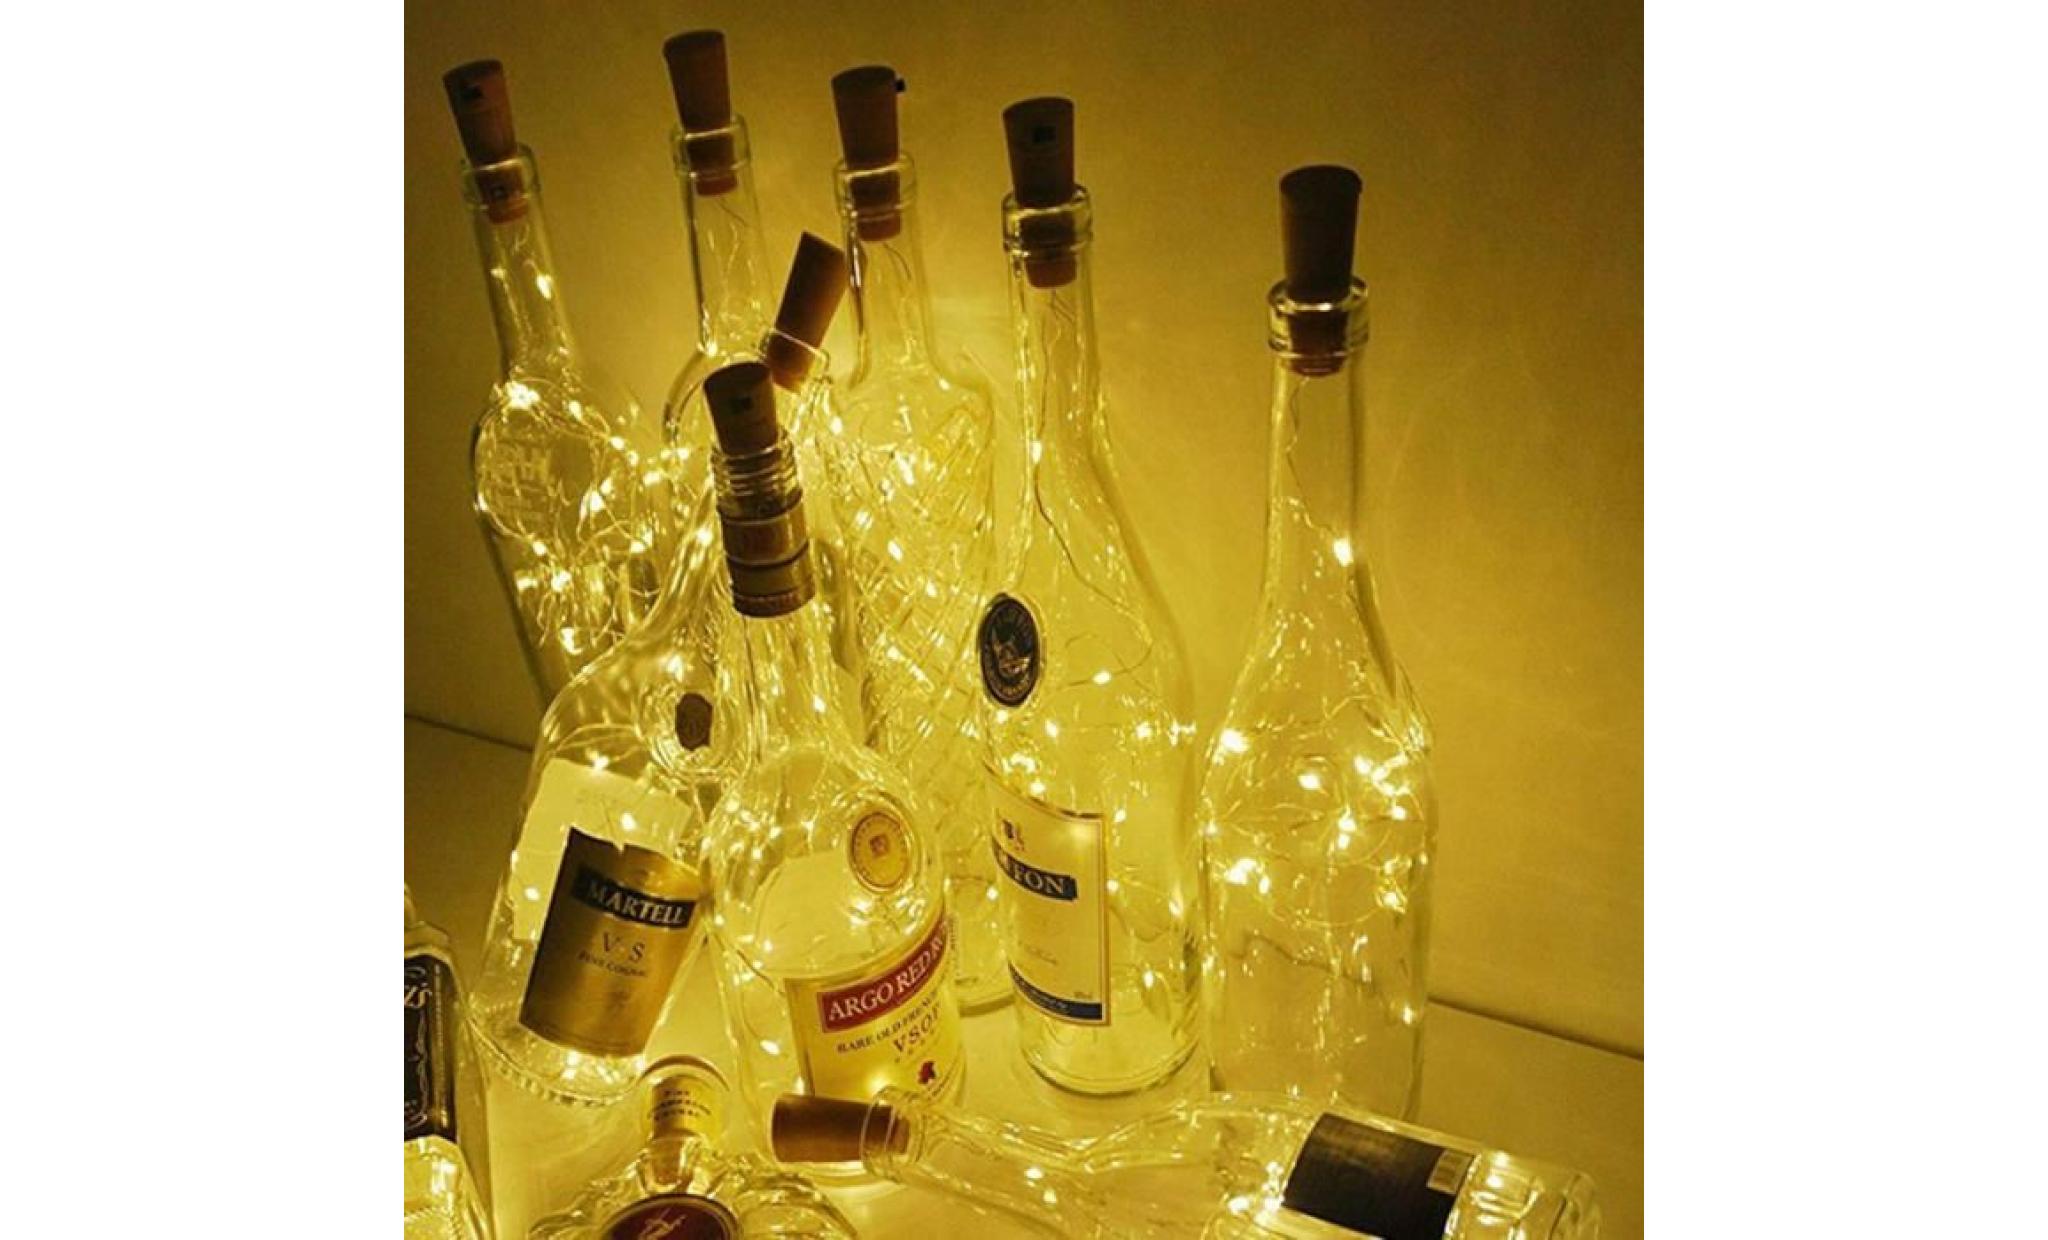 8pcs cork shaped led night starry light wine bottle lamp for party decor yellow pageare3365 pageare3365 pas cher